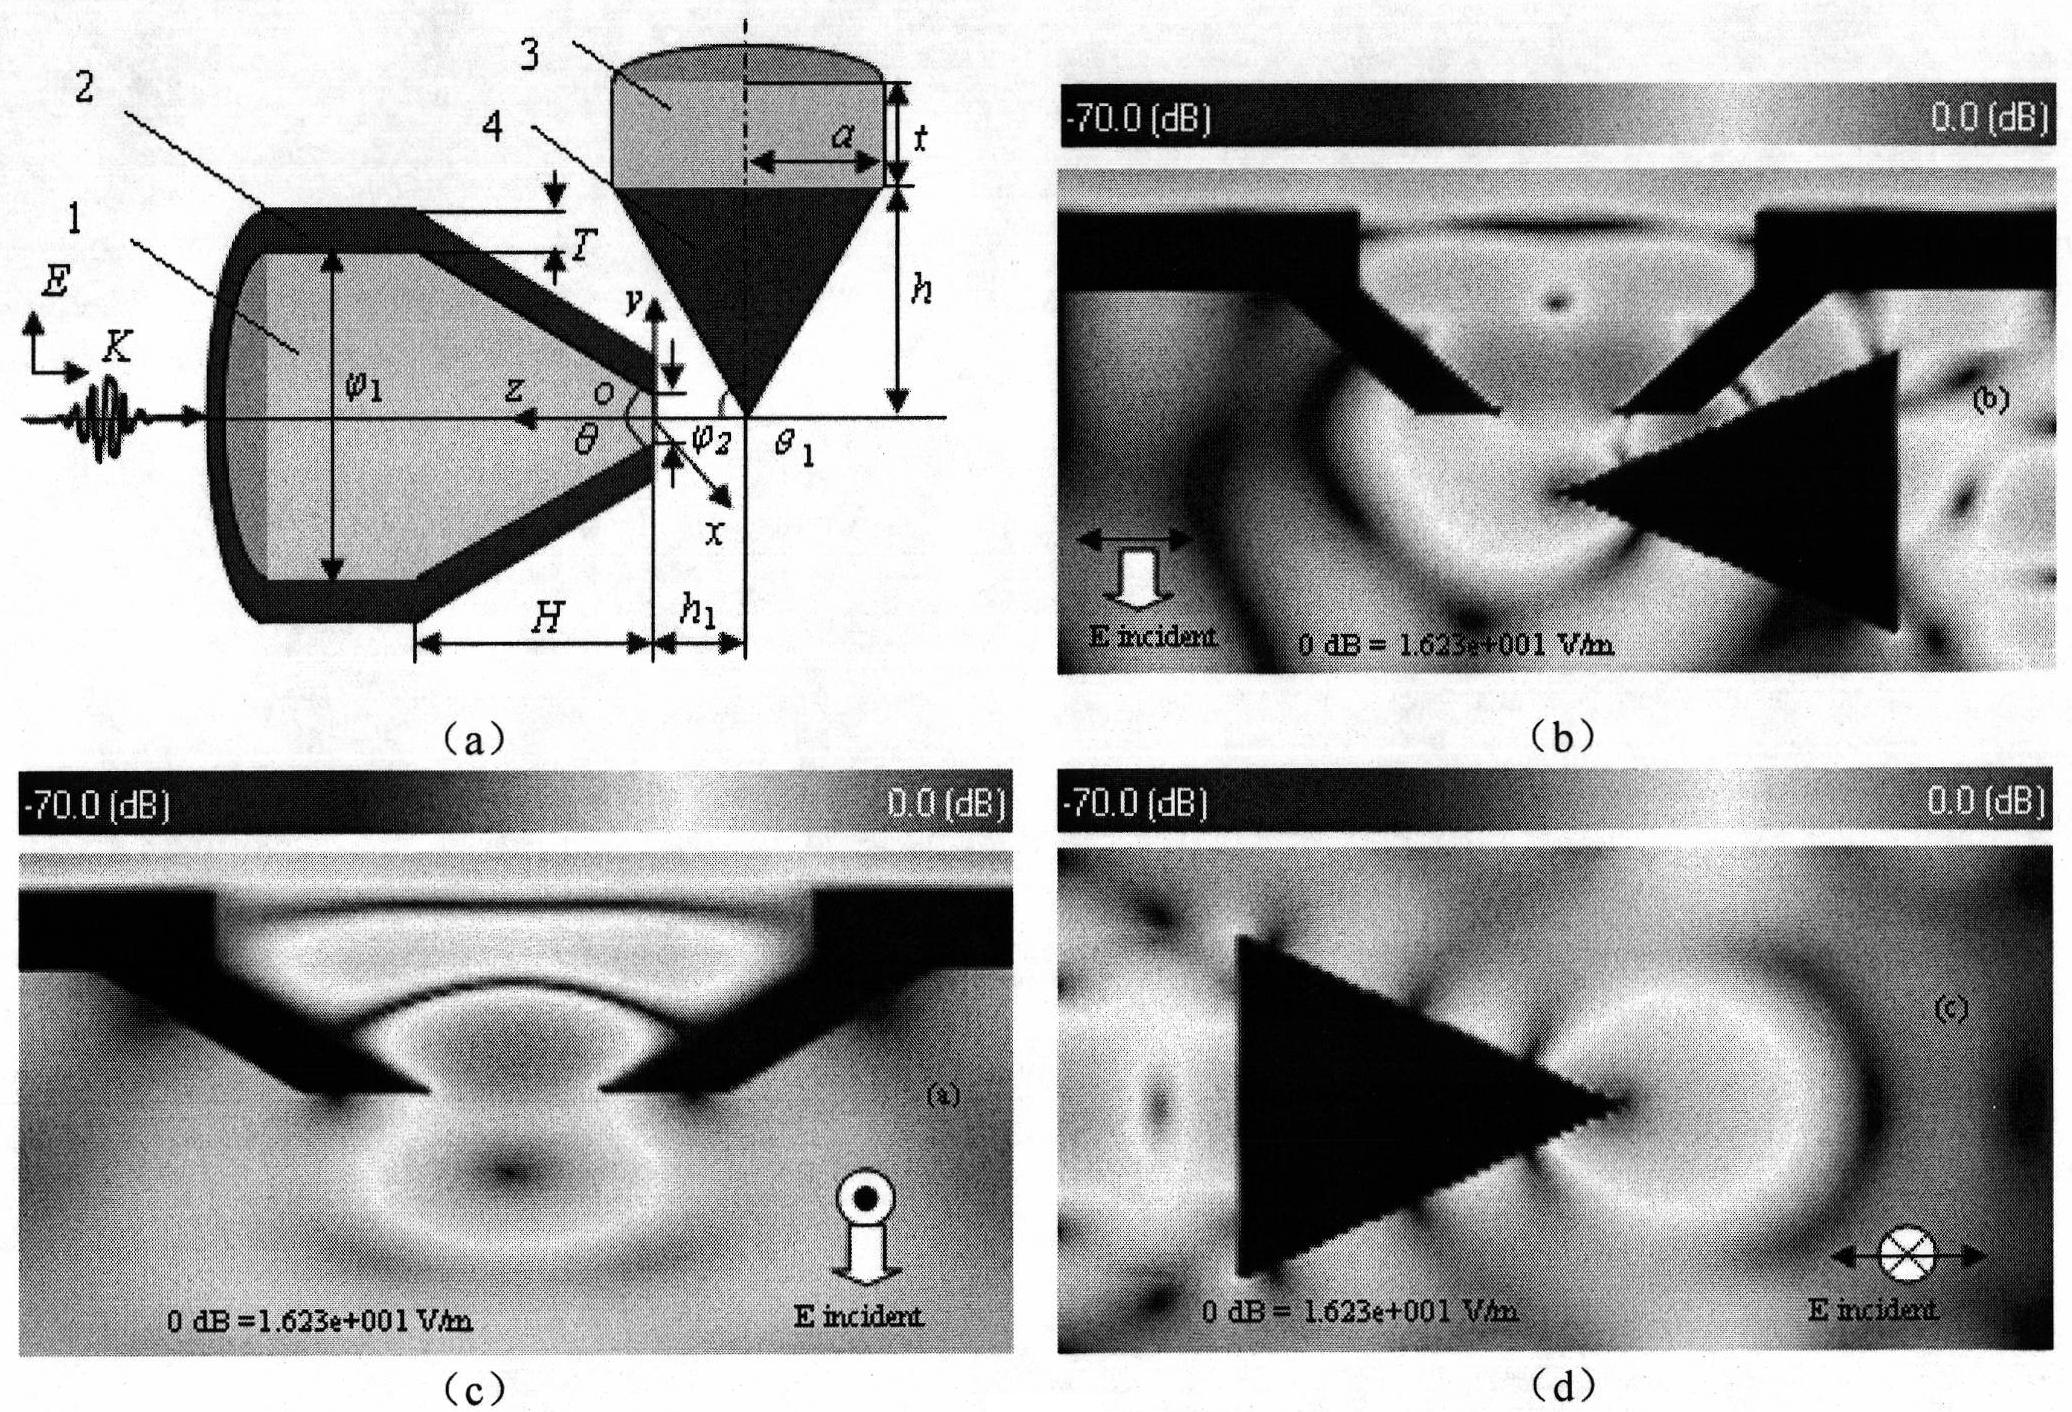 Nanomanipulation method for compounding laser near-field optical tweezers and AFM probe